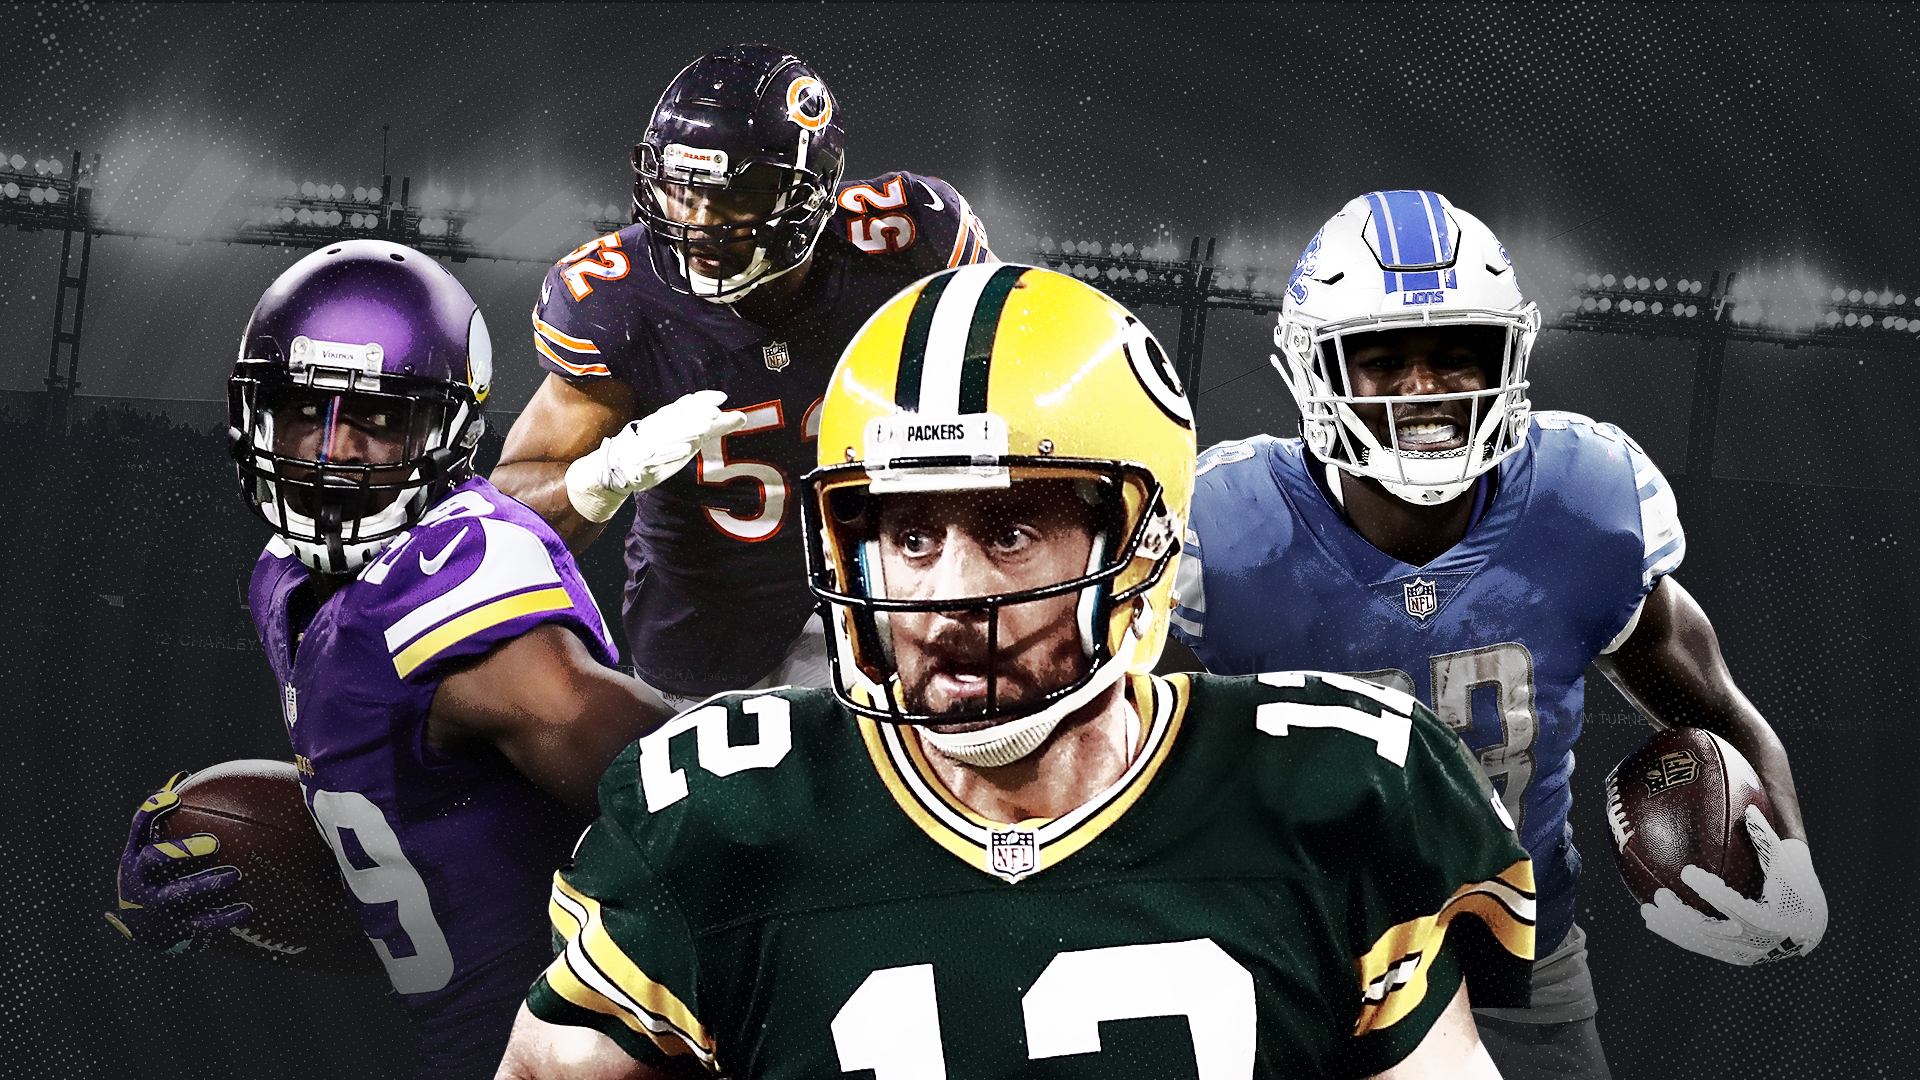 Episode 45 – NFC North and South